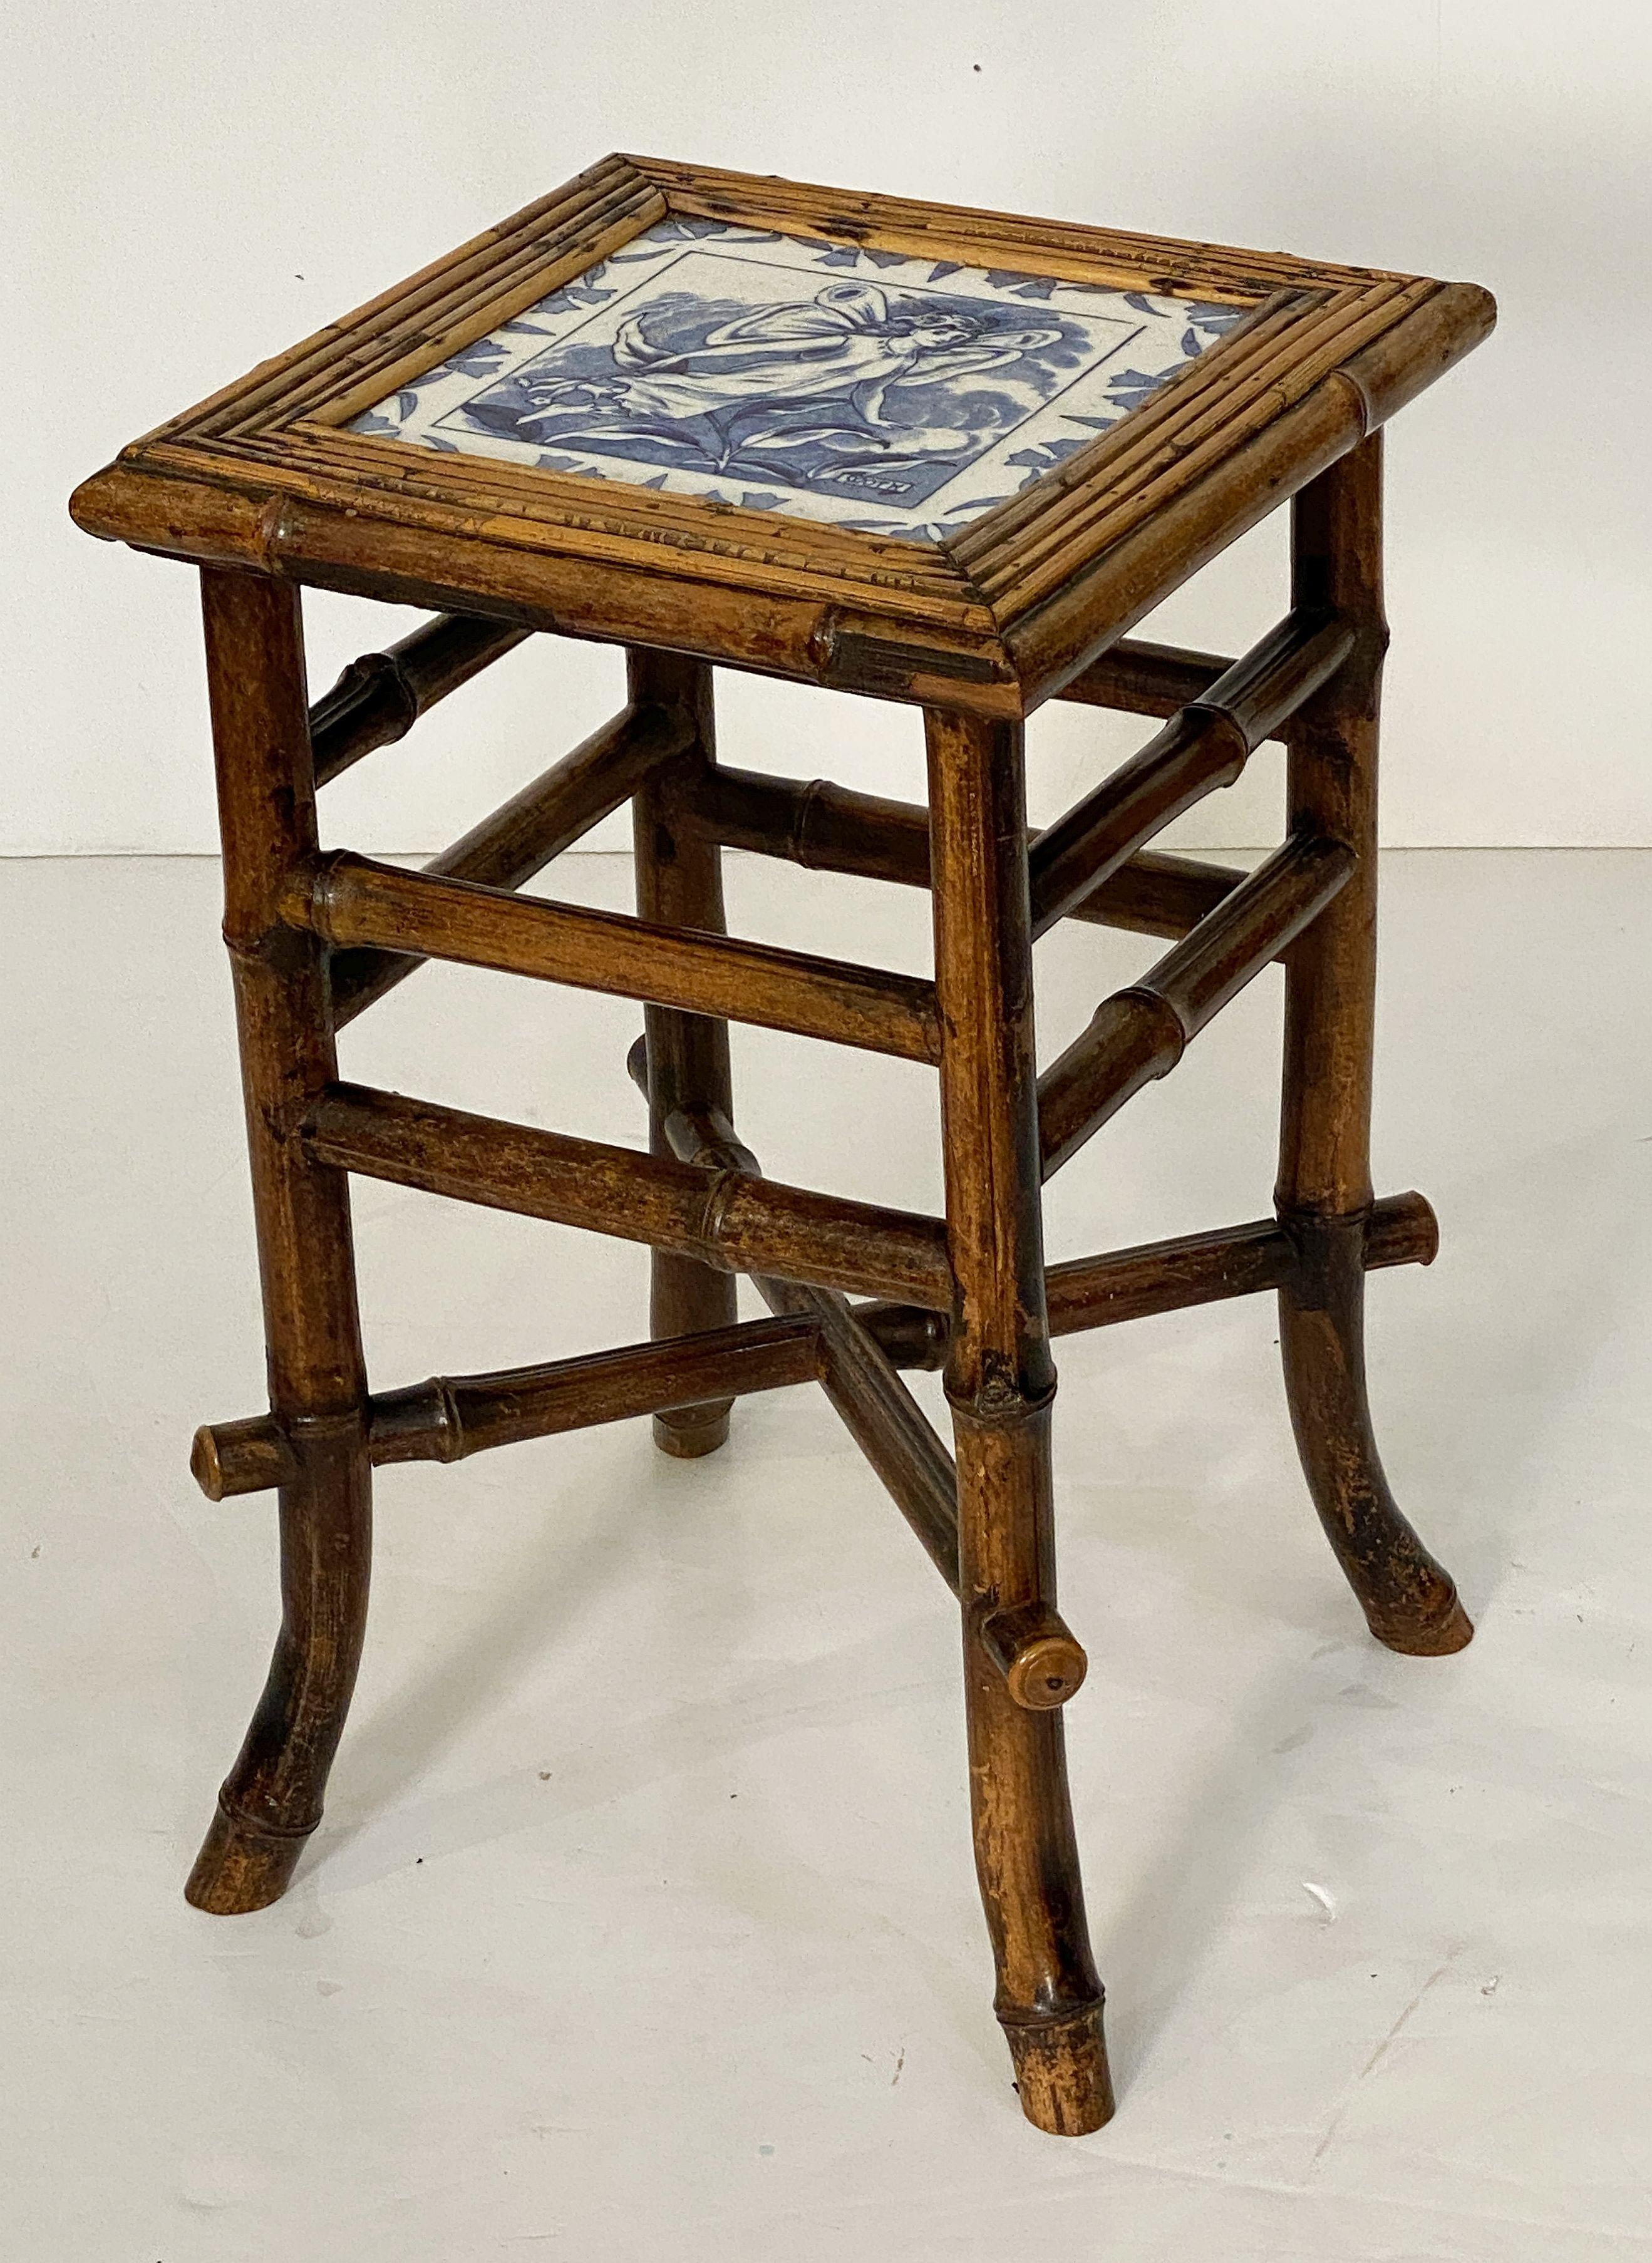 19th Century English Bamboo Table or Stool with Tile Seat from the Aesthetic Movement Era For Sale